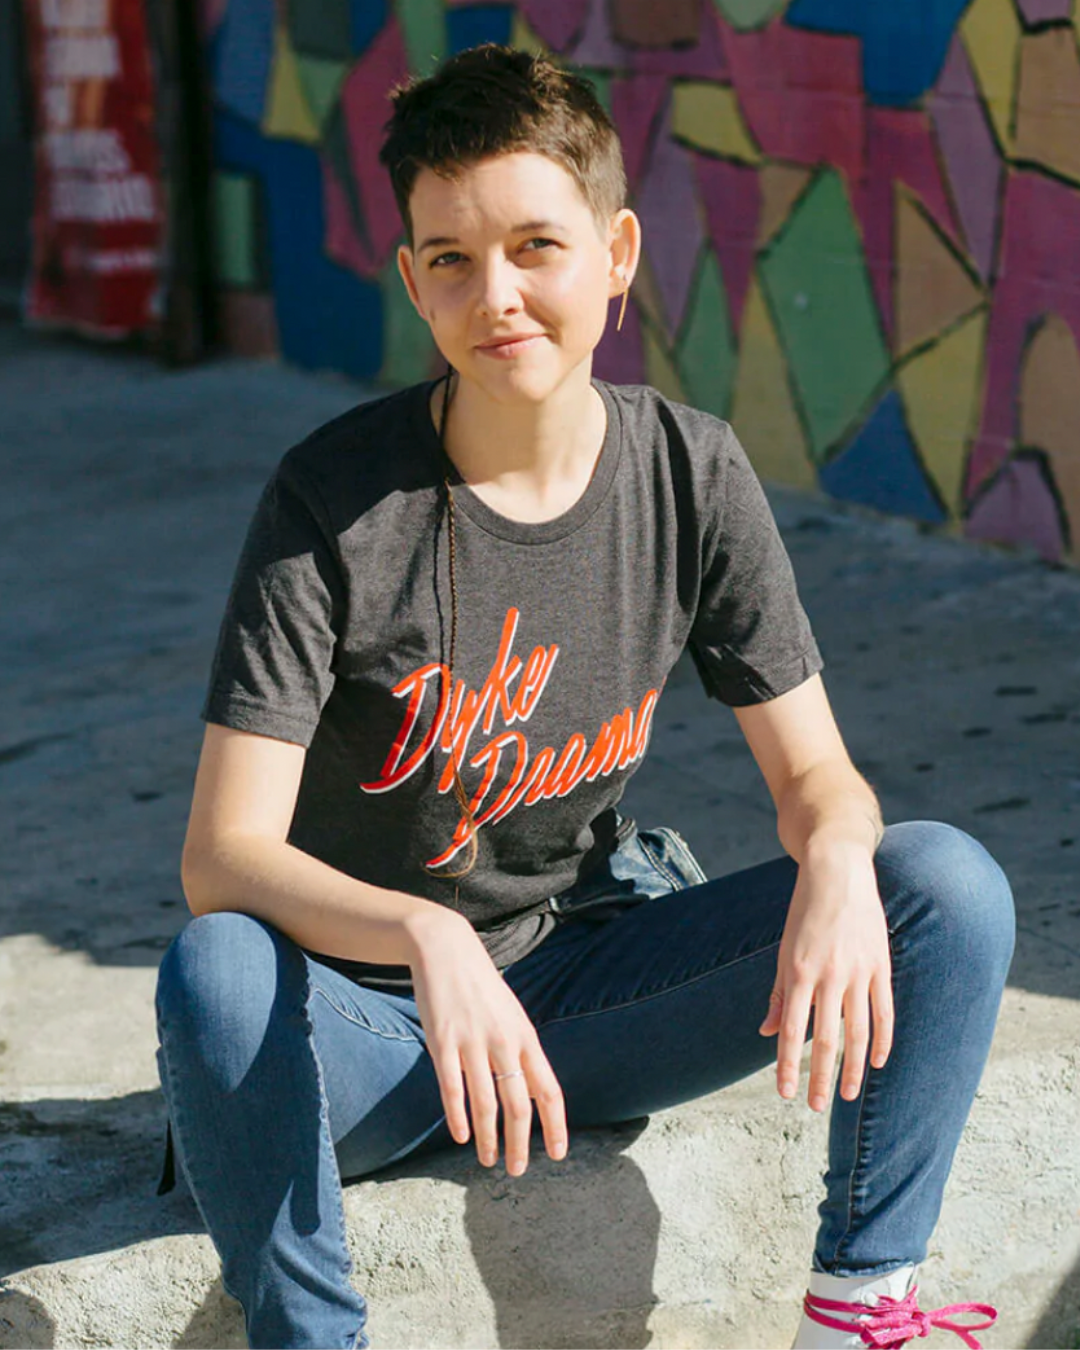 Model Janell is wearing the Dyke Drama Tee in size XS. She is 5'7" and her bra size is 34C. The tee is charcoal grey with the graphic "Dyke Drama" in a jagged red typeface with a white drop shadow.